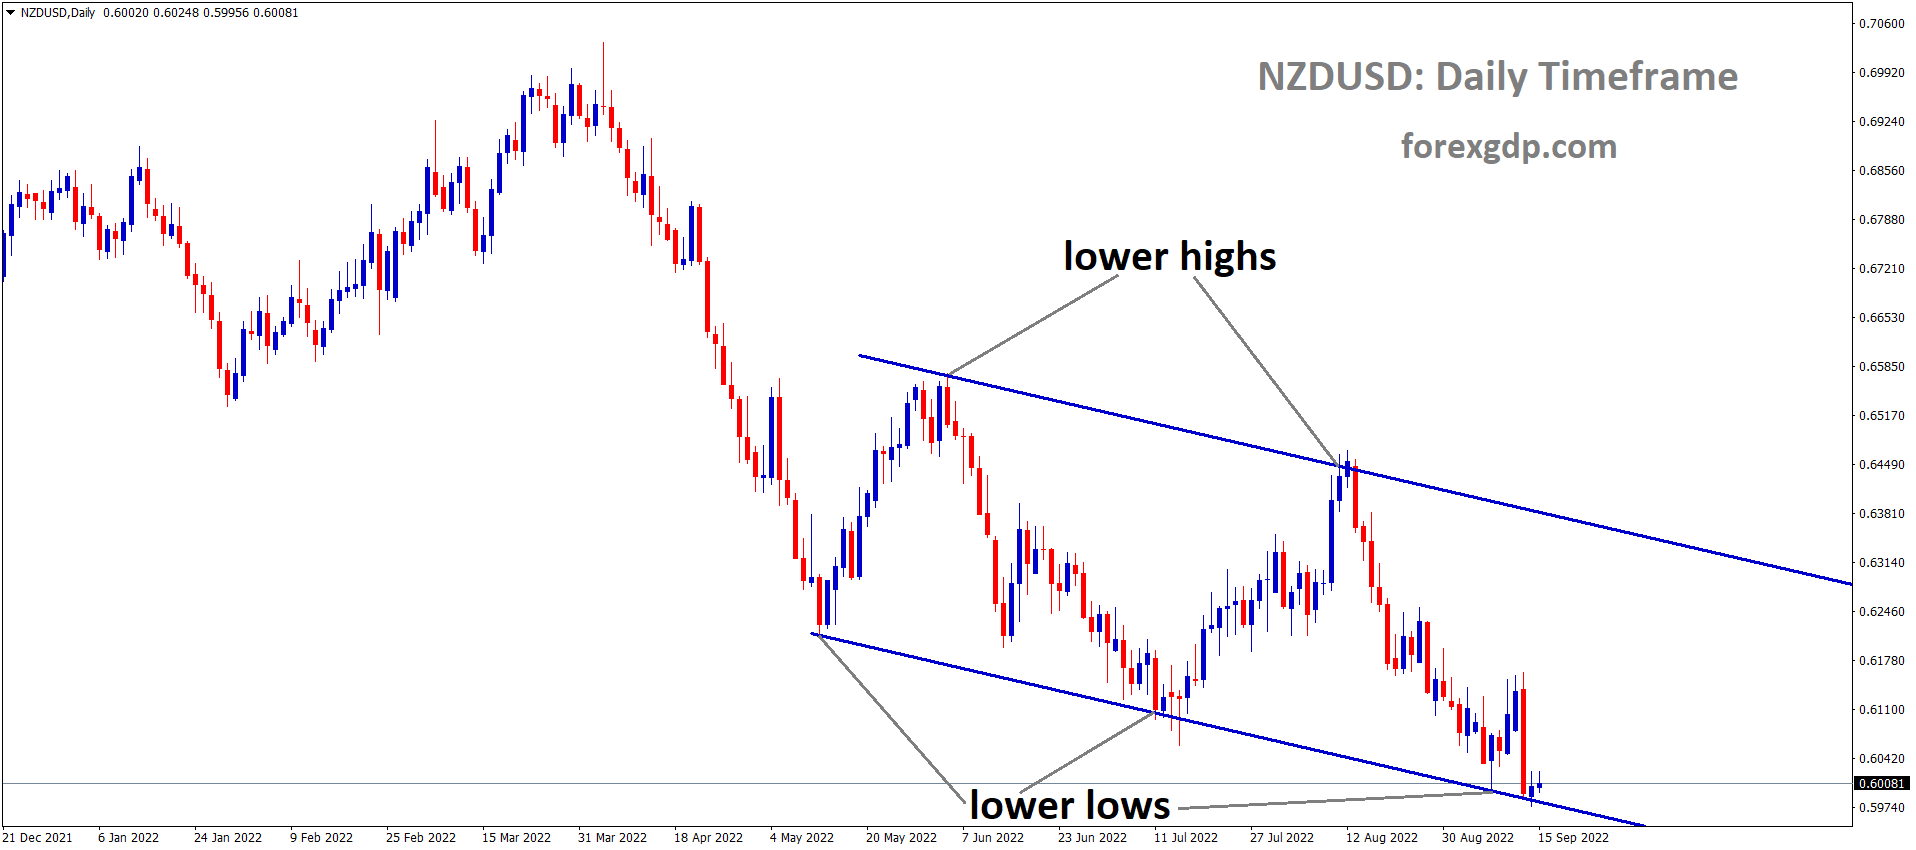 NZDUSD is moving in the Descending channel and the market has reached the lower low area of the channel